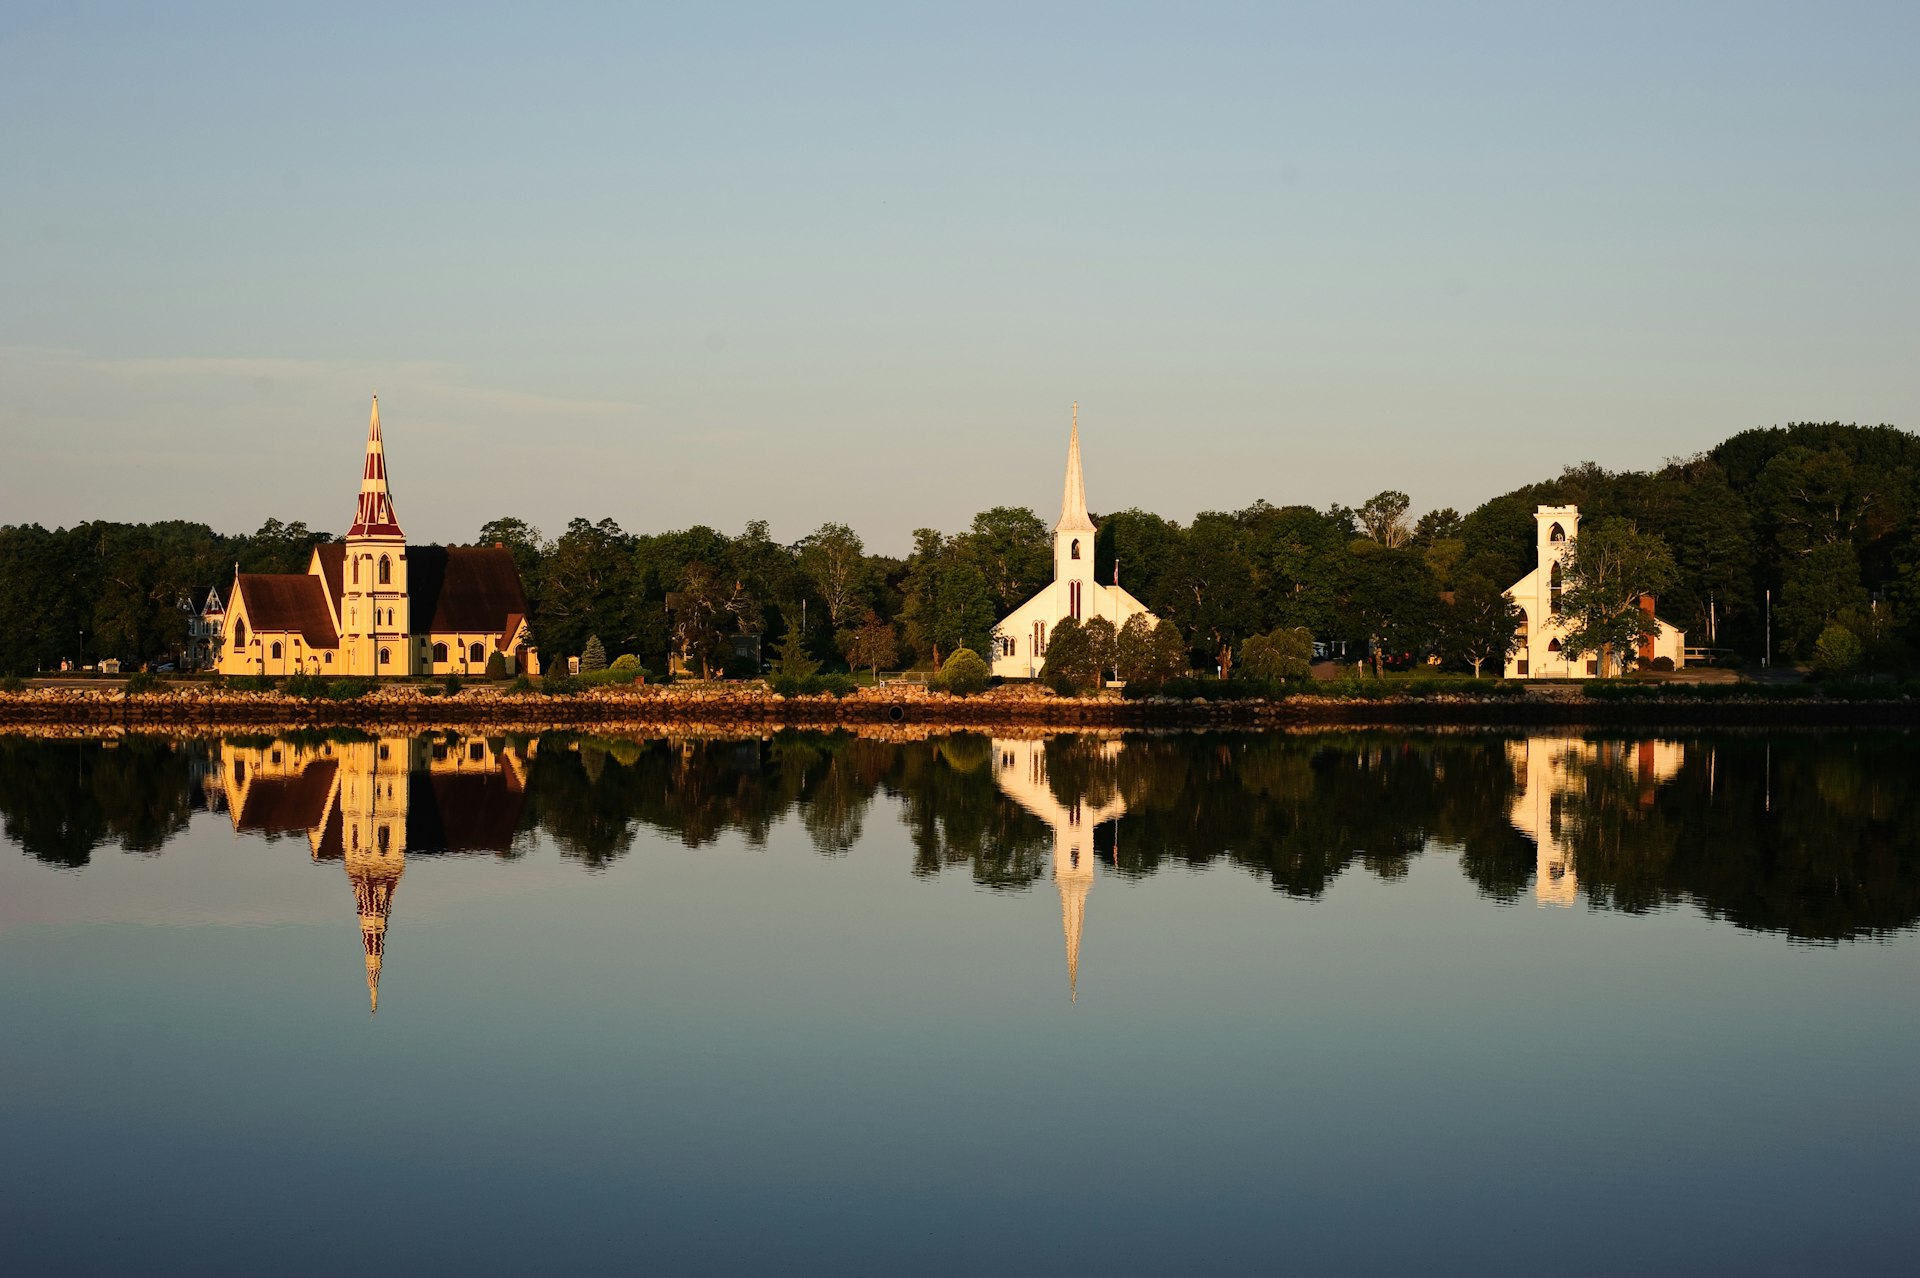 The famous three churches and their reflections in the water, Mahone Bay, Nova Scotia, Canada